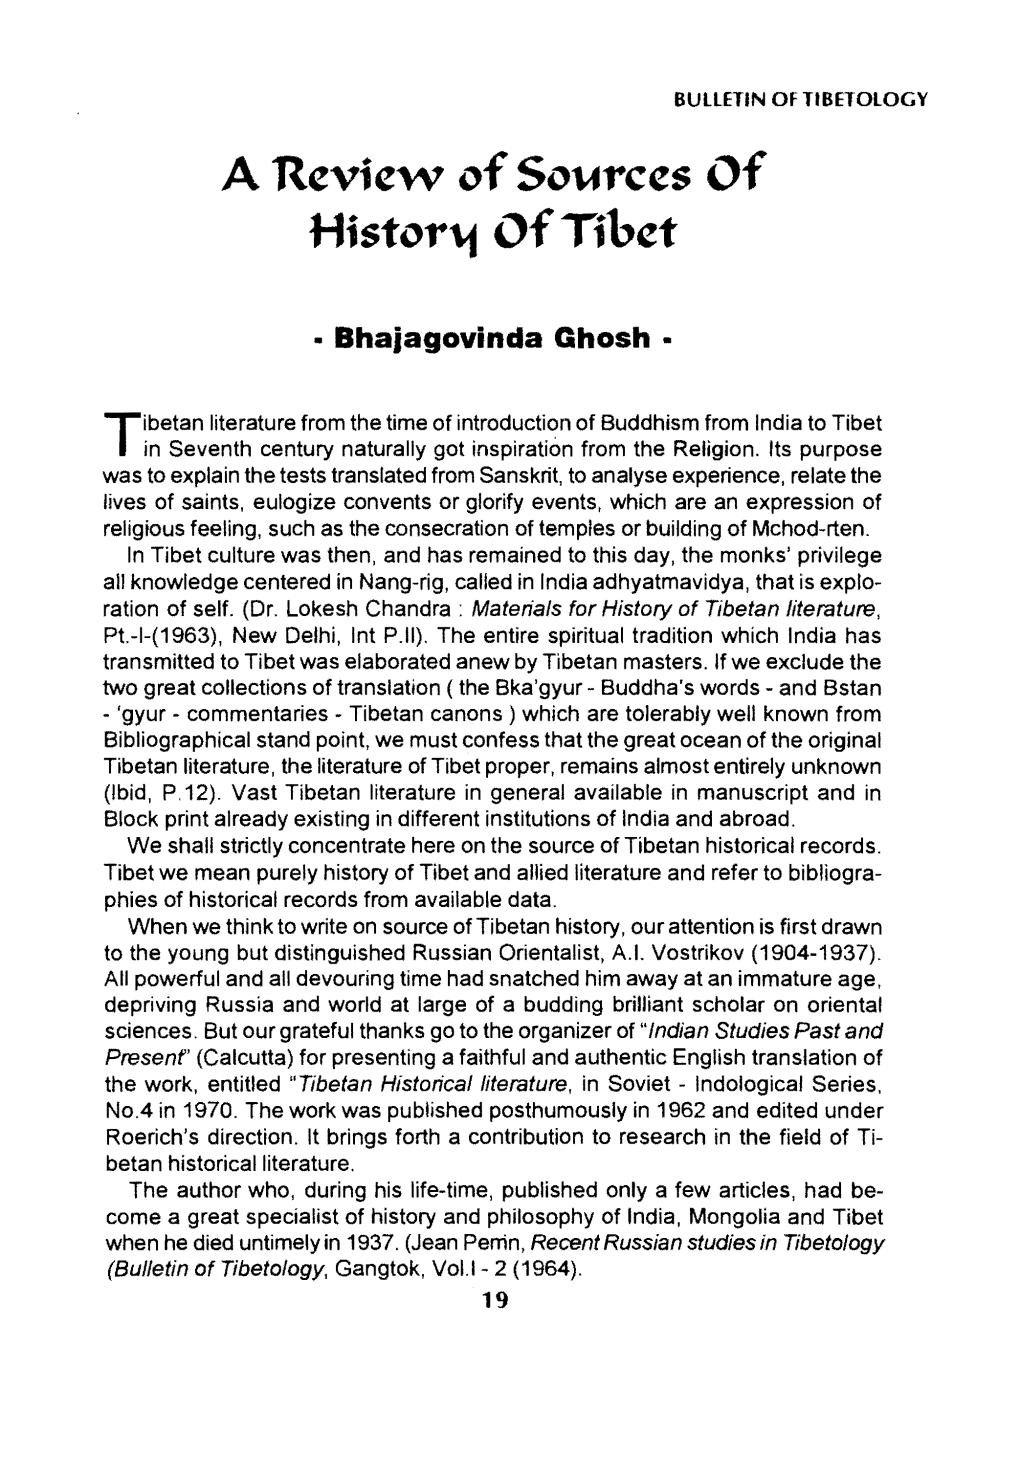 A Revie of Sources of History of Tibet